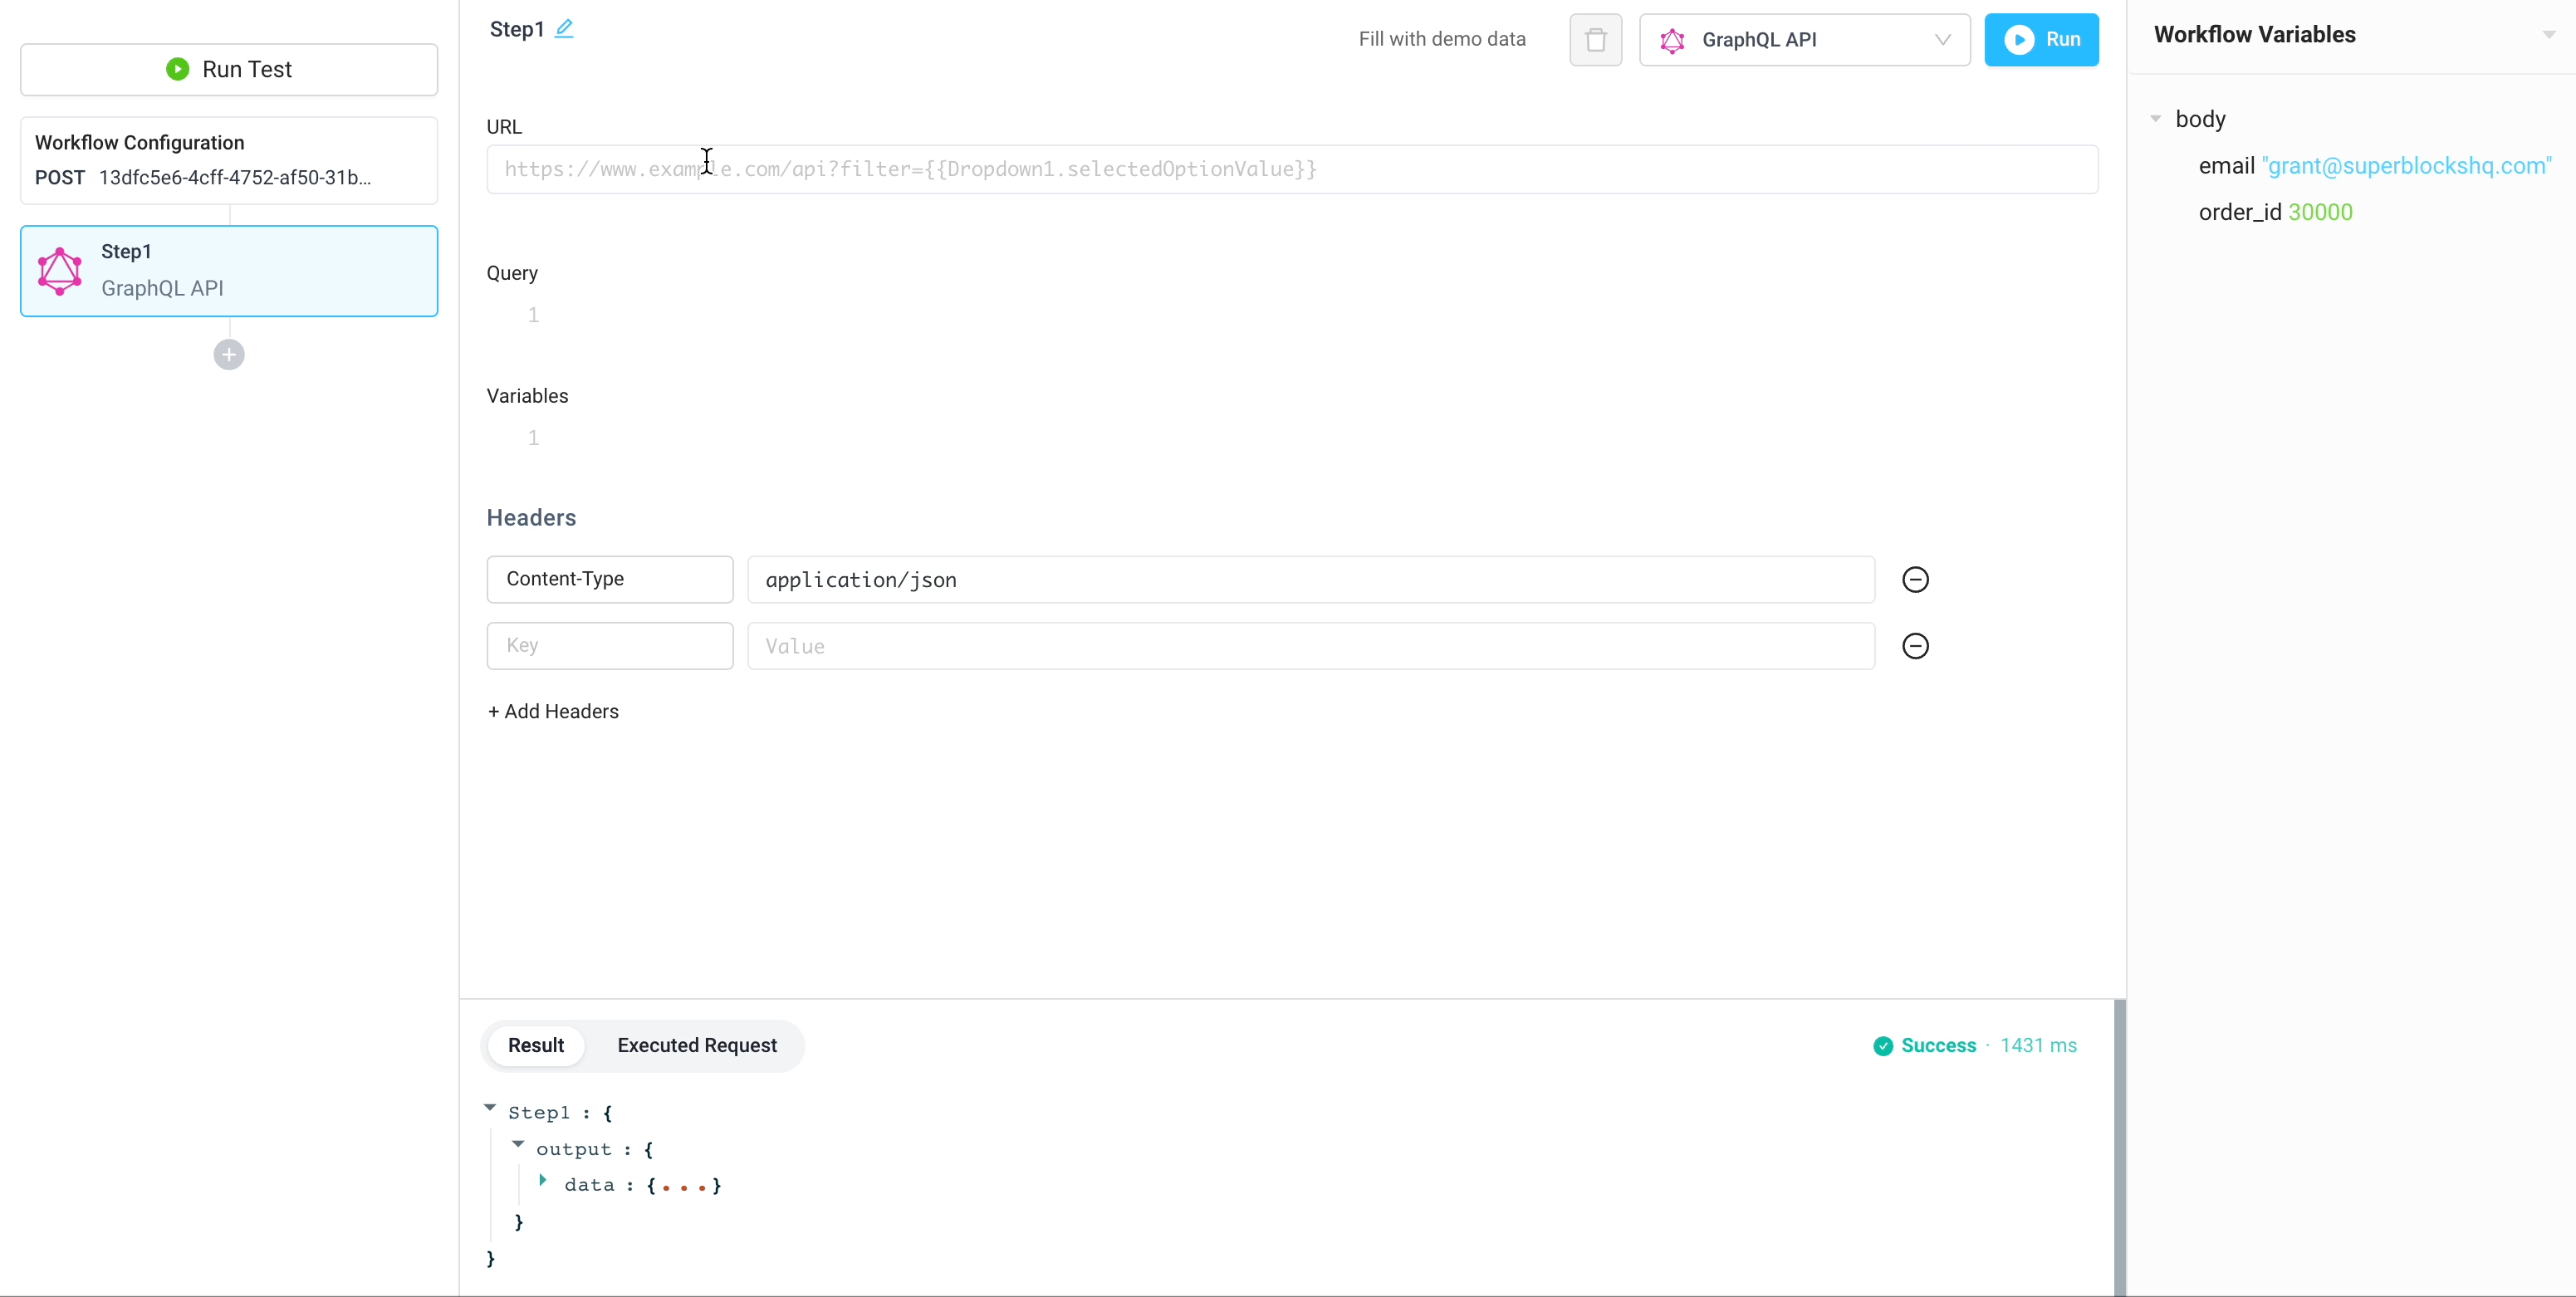 Graphql step using the test body variable and return output to the user